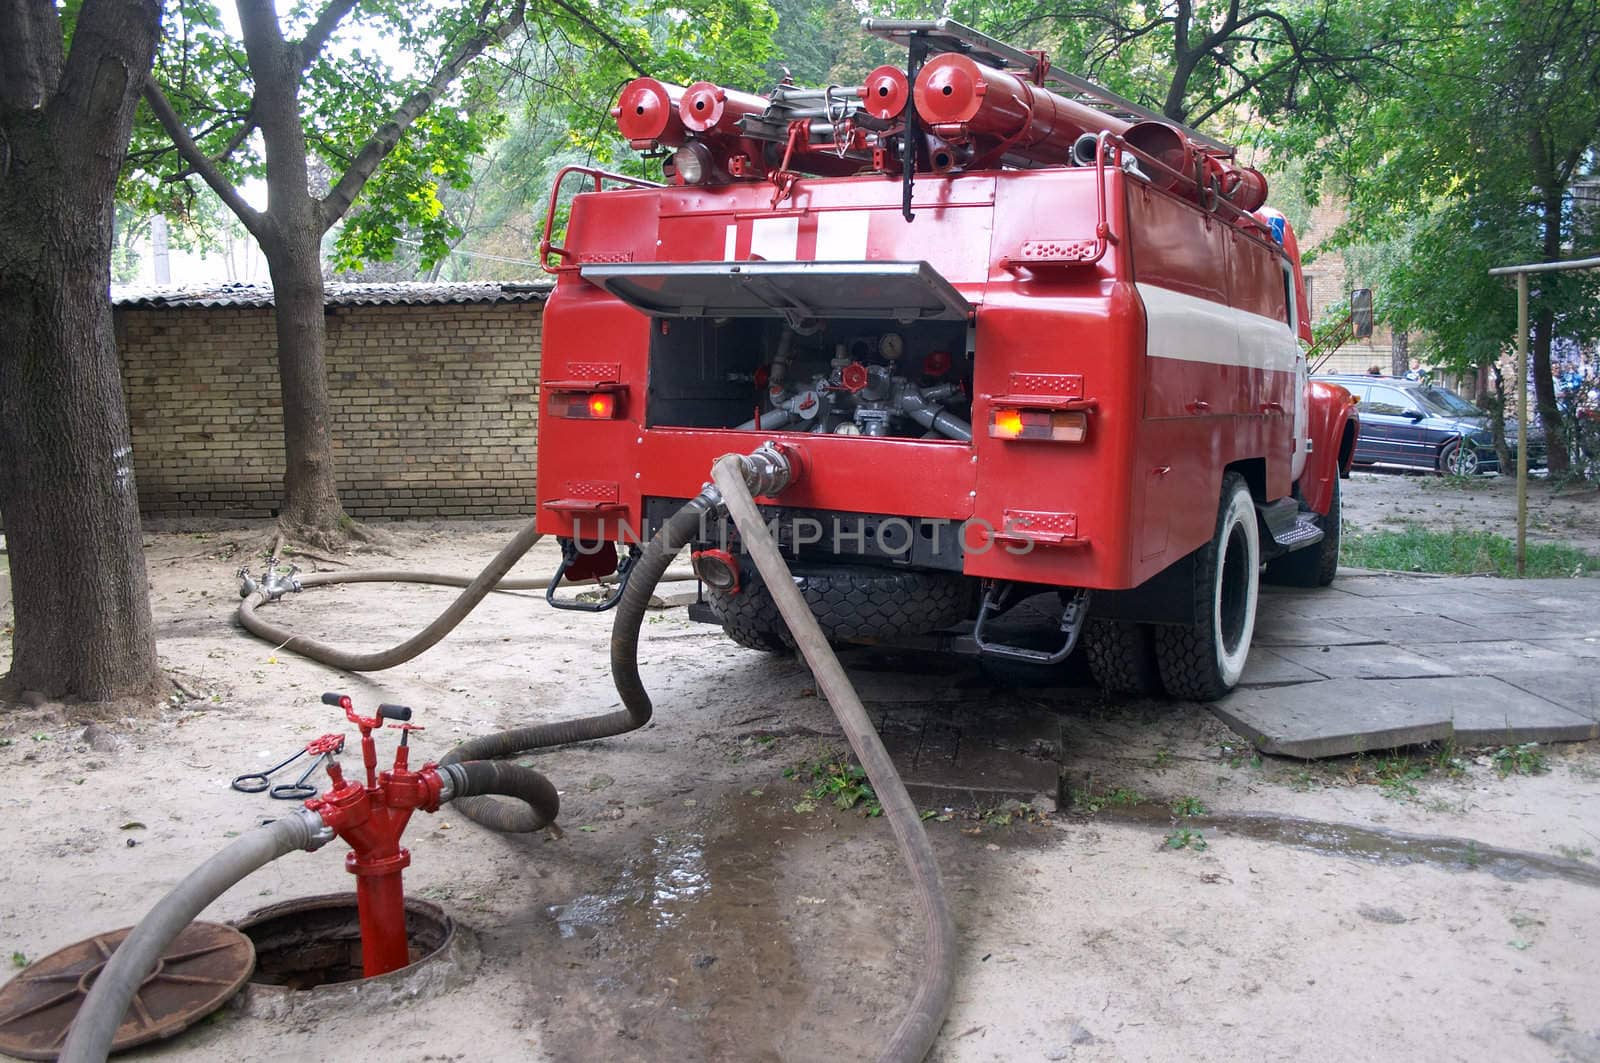 fireengine connected to firecock by firehose